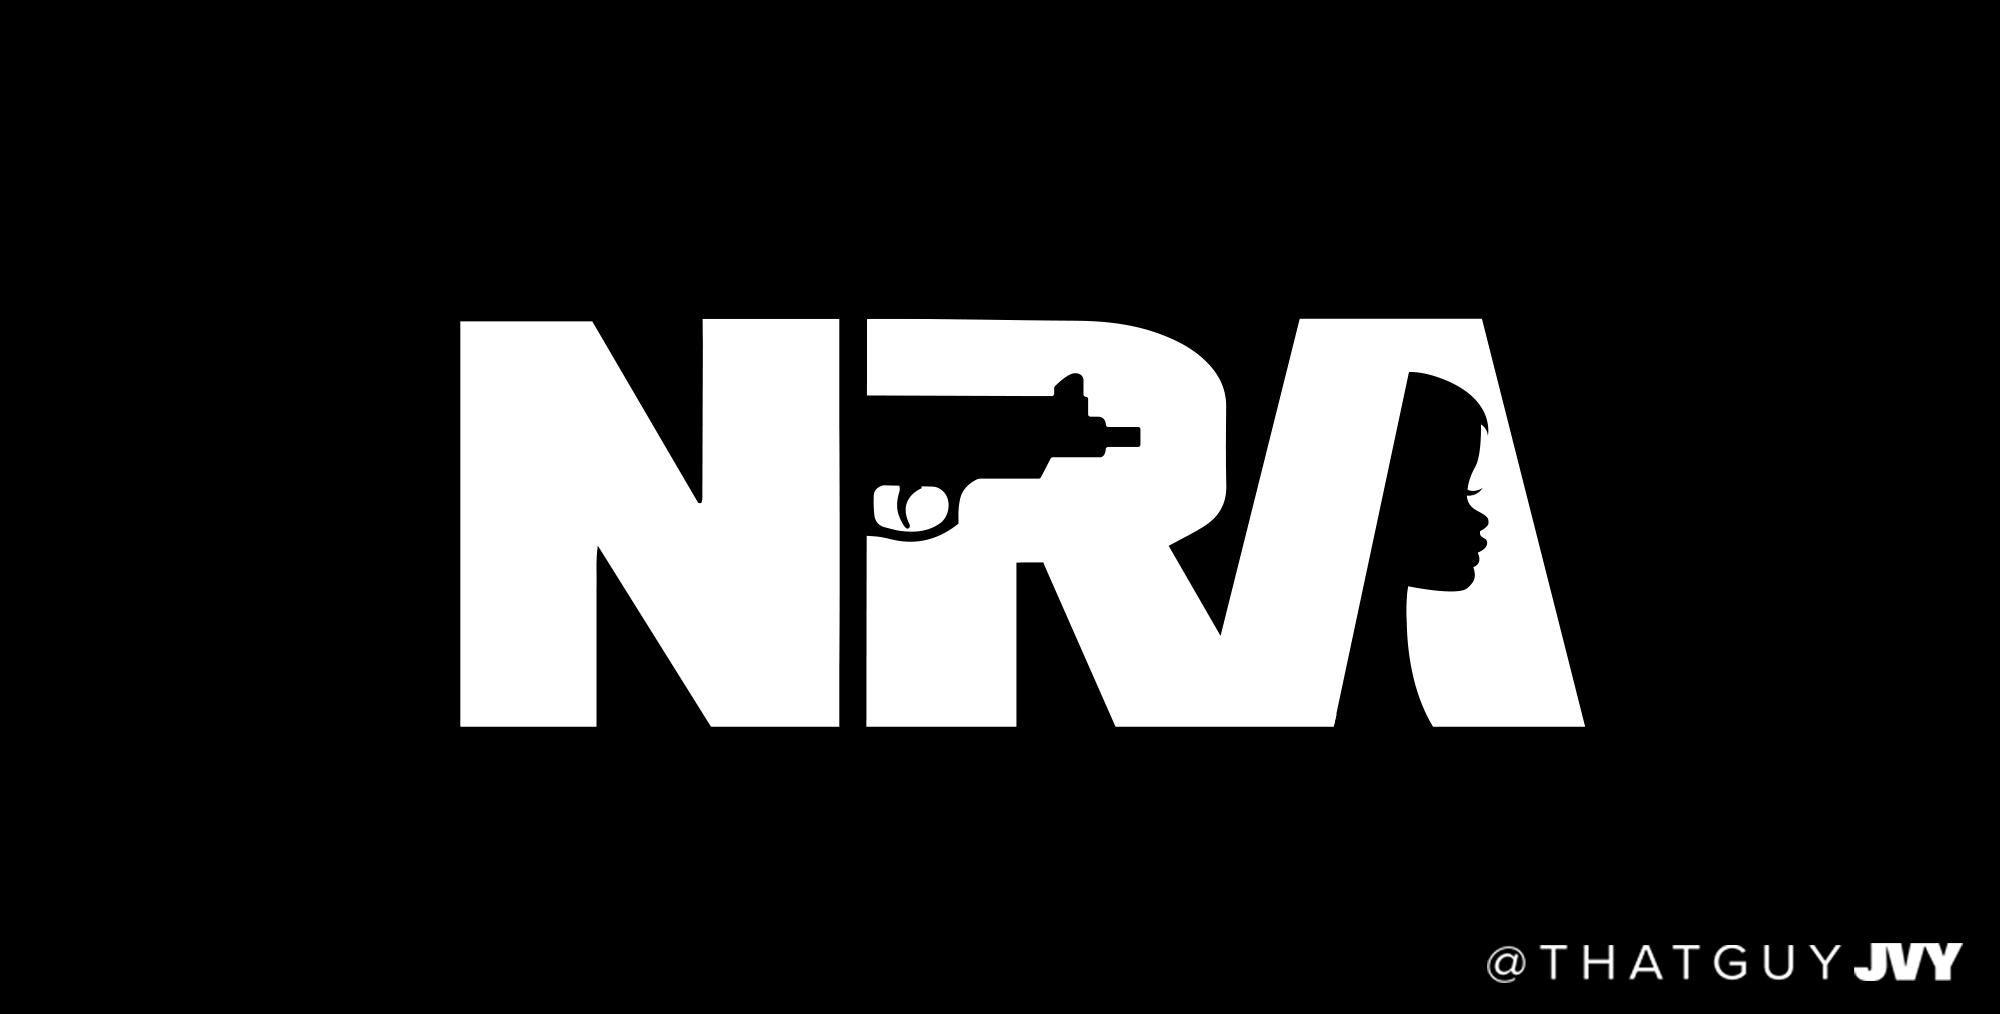 NRA Logo - The new NRA logo. Designed for us to fight back. : democrats